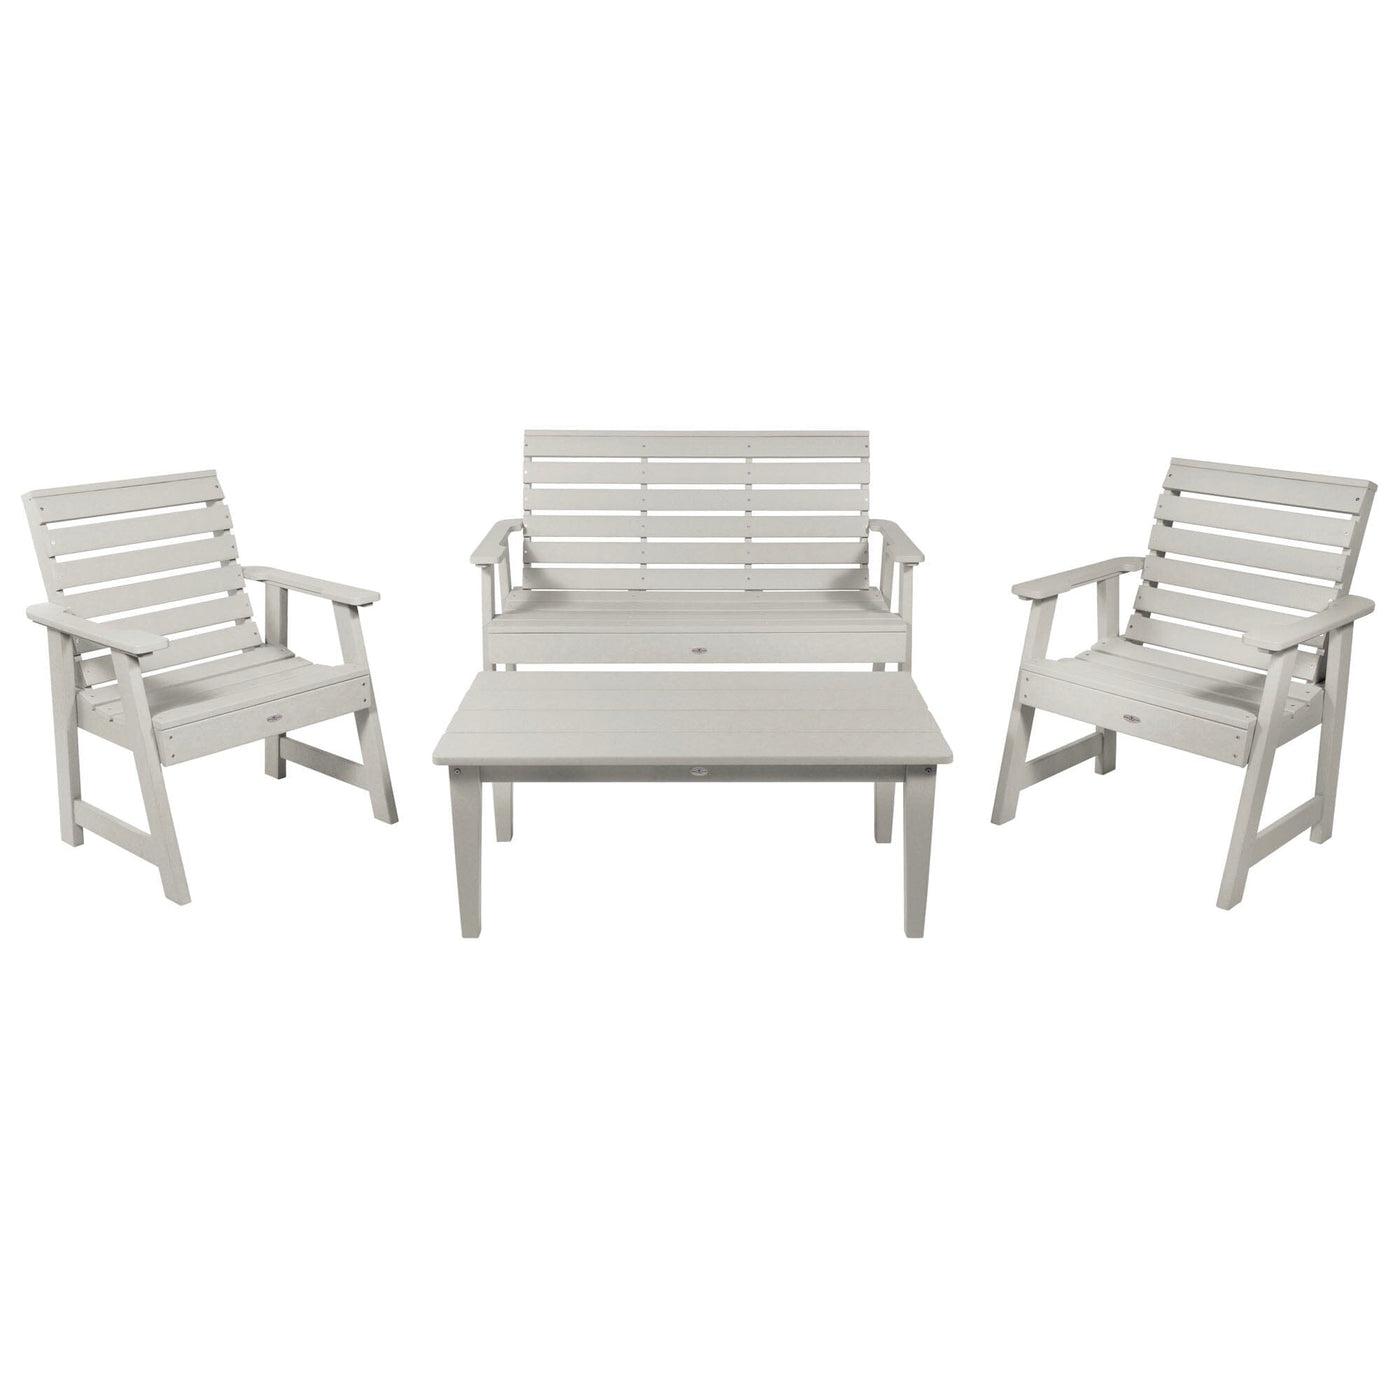 Riverside Garden Bench 4ft, 2 Garden Chairs, and Conversation Table Set Kitted Set Bahia Verde Outdoors Cove Gray 